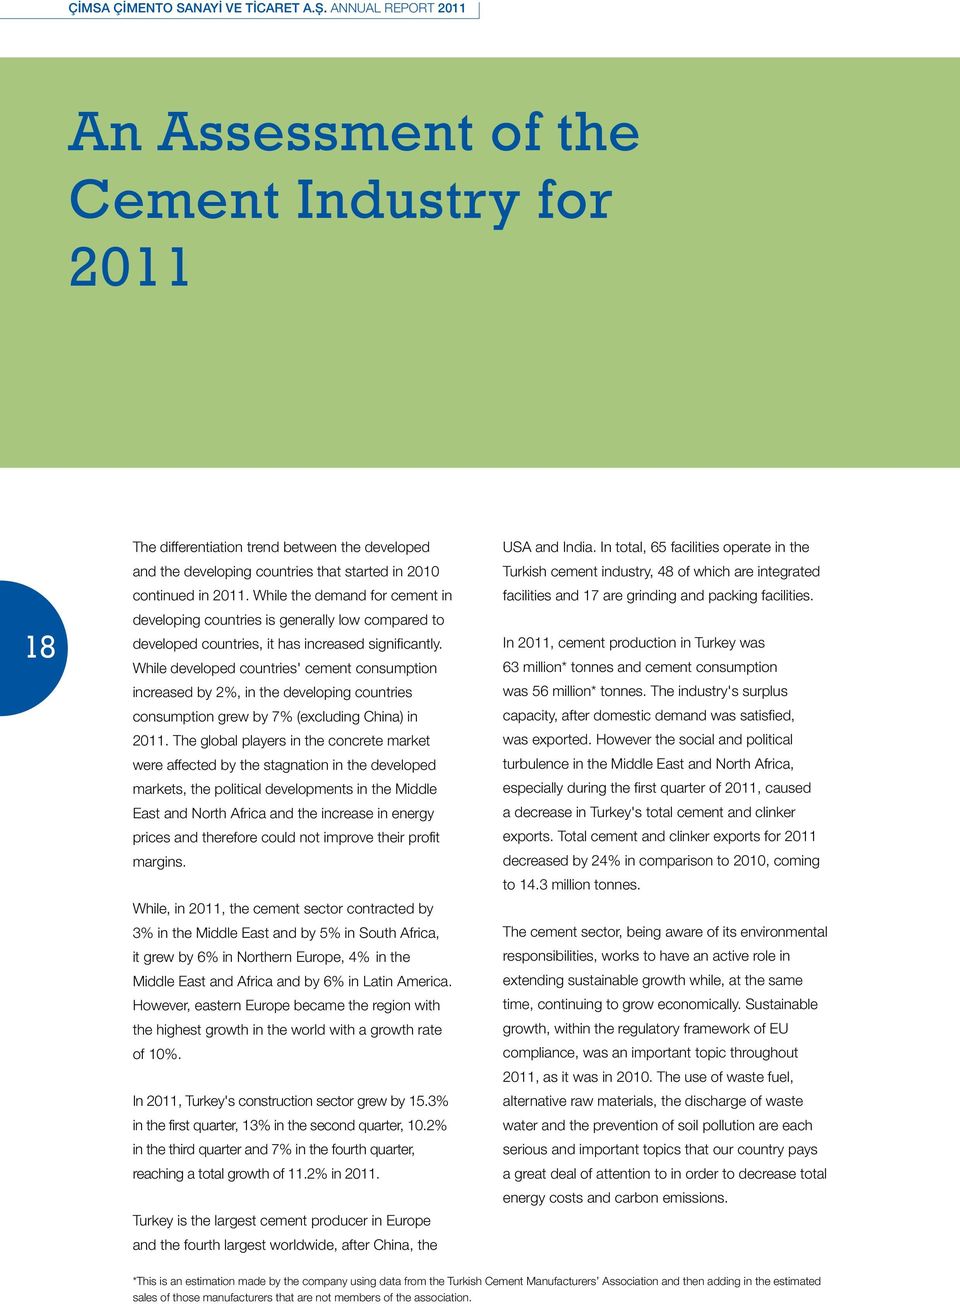 While the demand for cement in developing countries is generally low compared to developed countries, it has increased significantly.